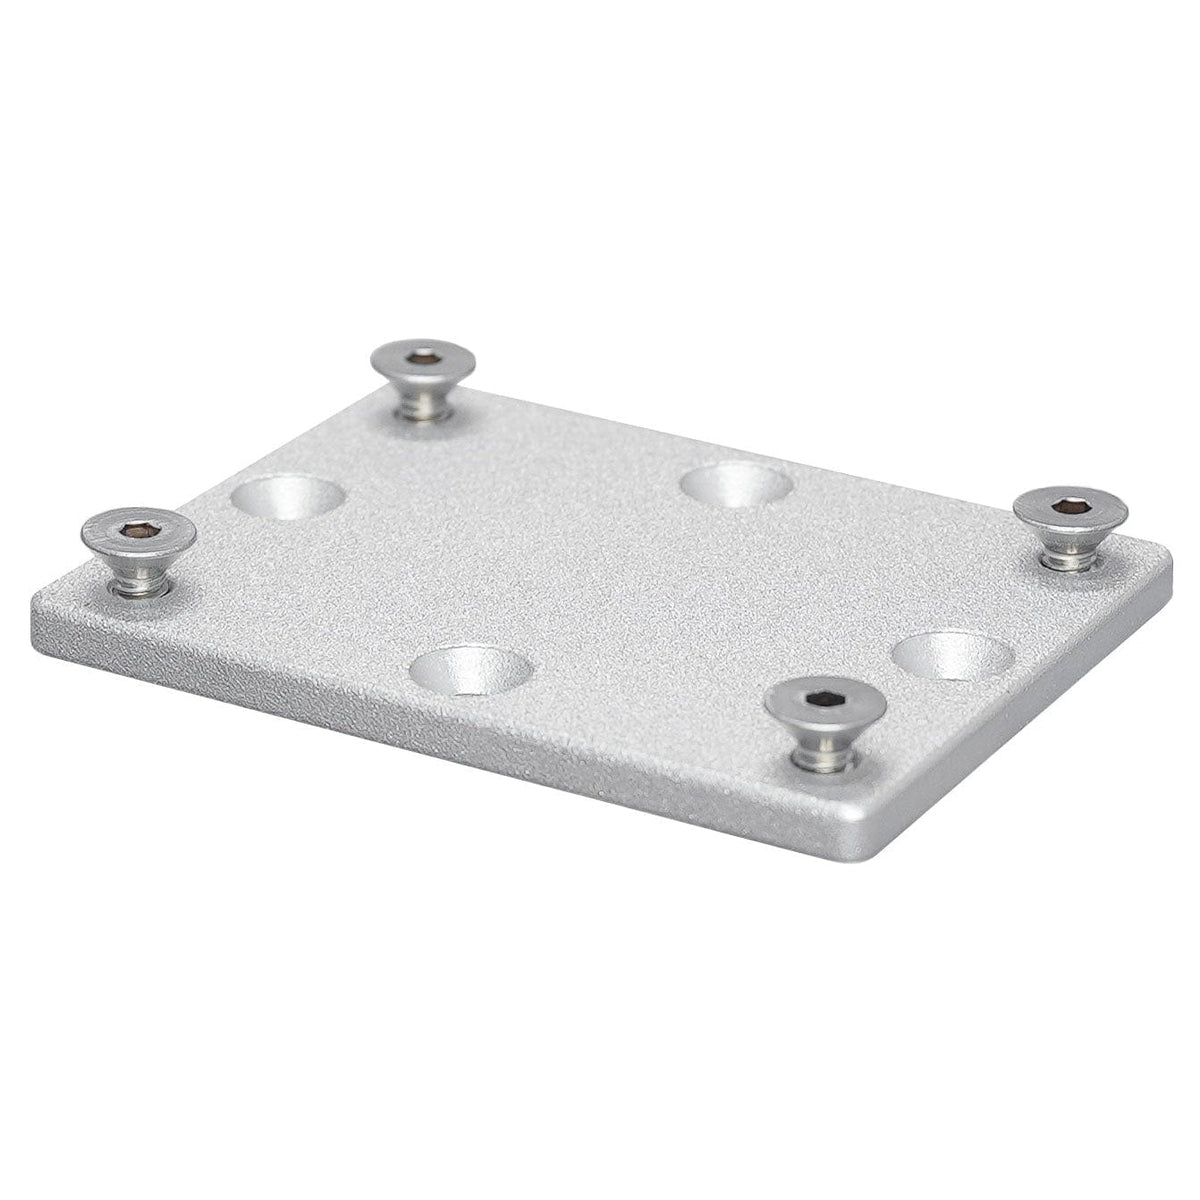 Traxstech Qualifies for Free Shipping Traxstech Deck Sub-Plate for Electronic Mounts 3" x 4" #ECMP-4